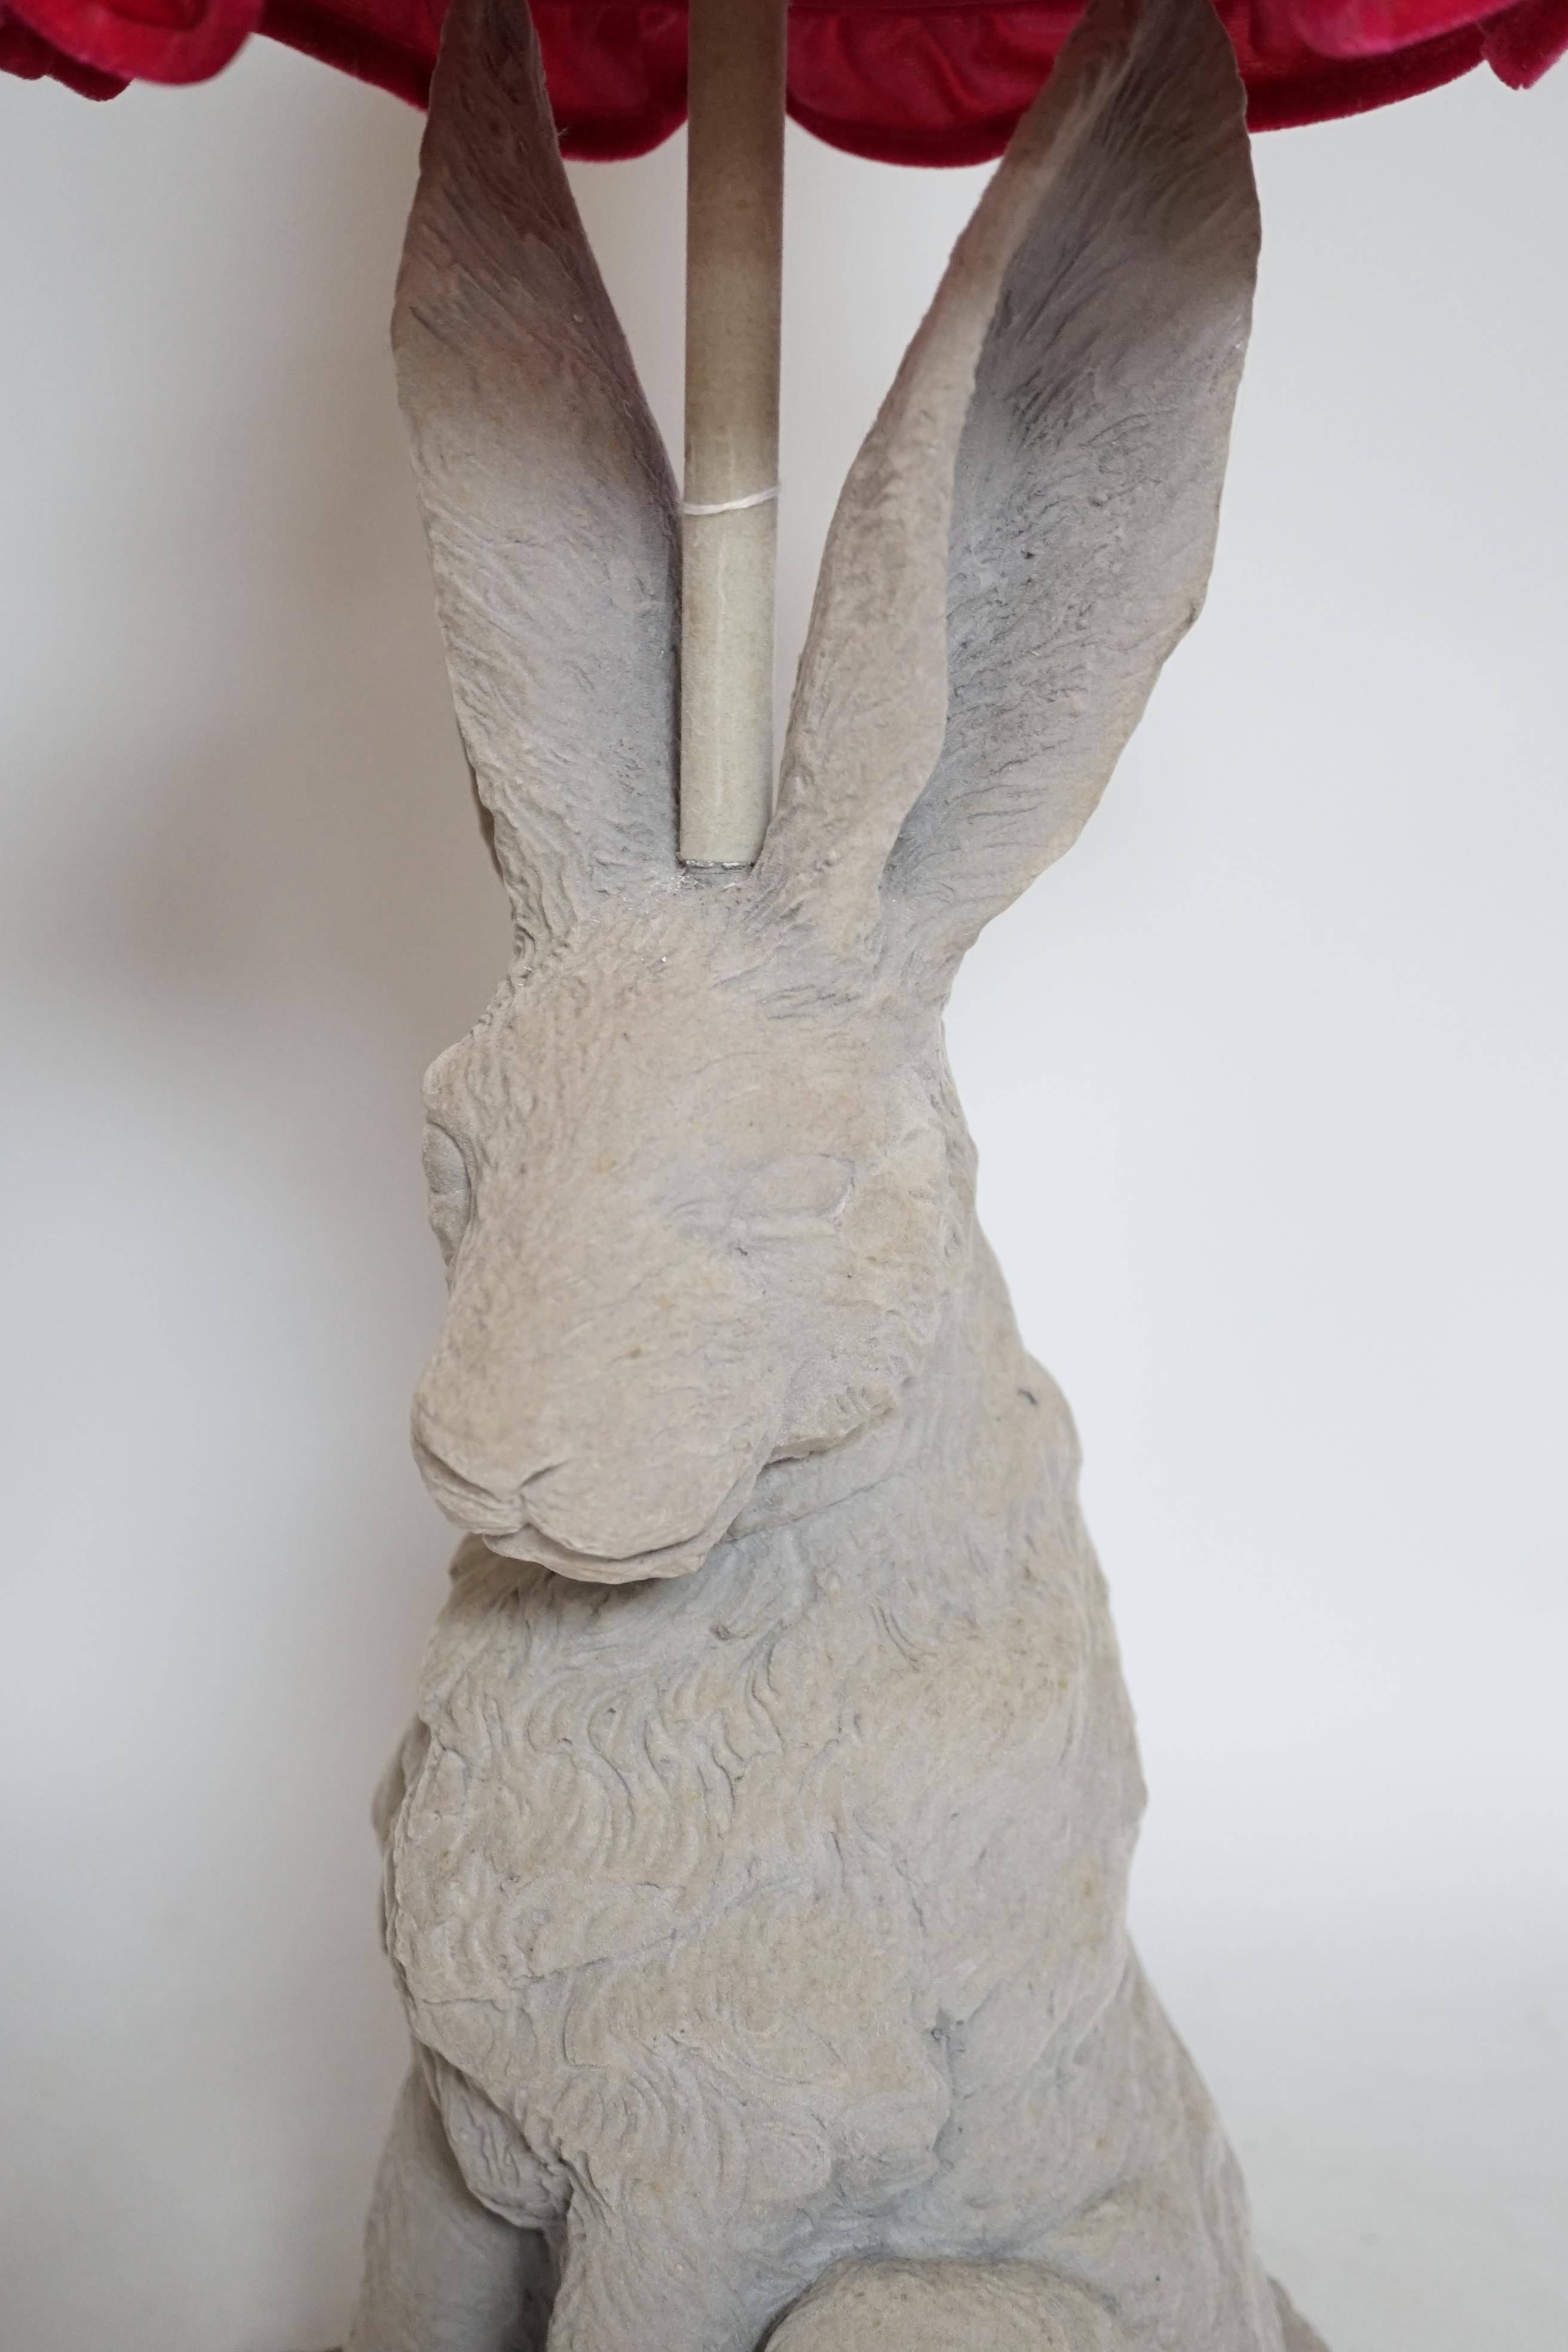 A modern novelty table lamp in the form of a hare, 58cm high